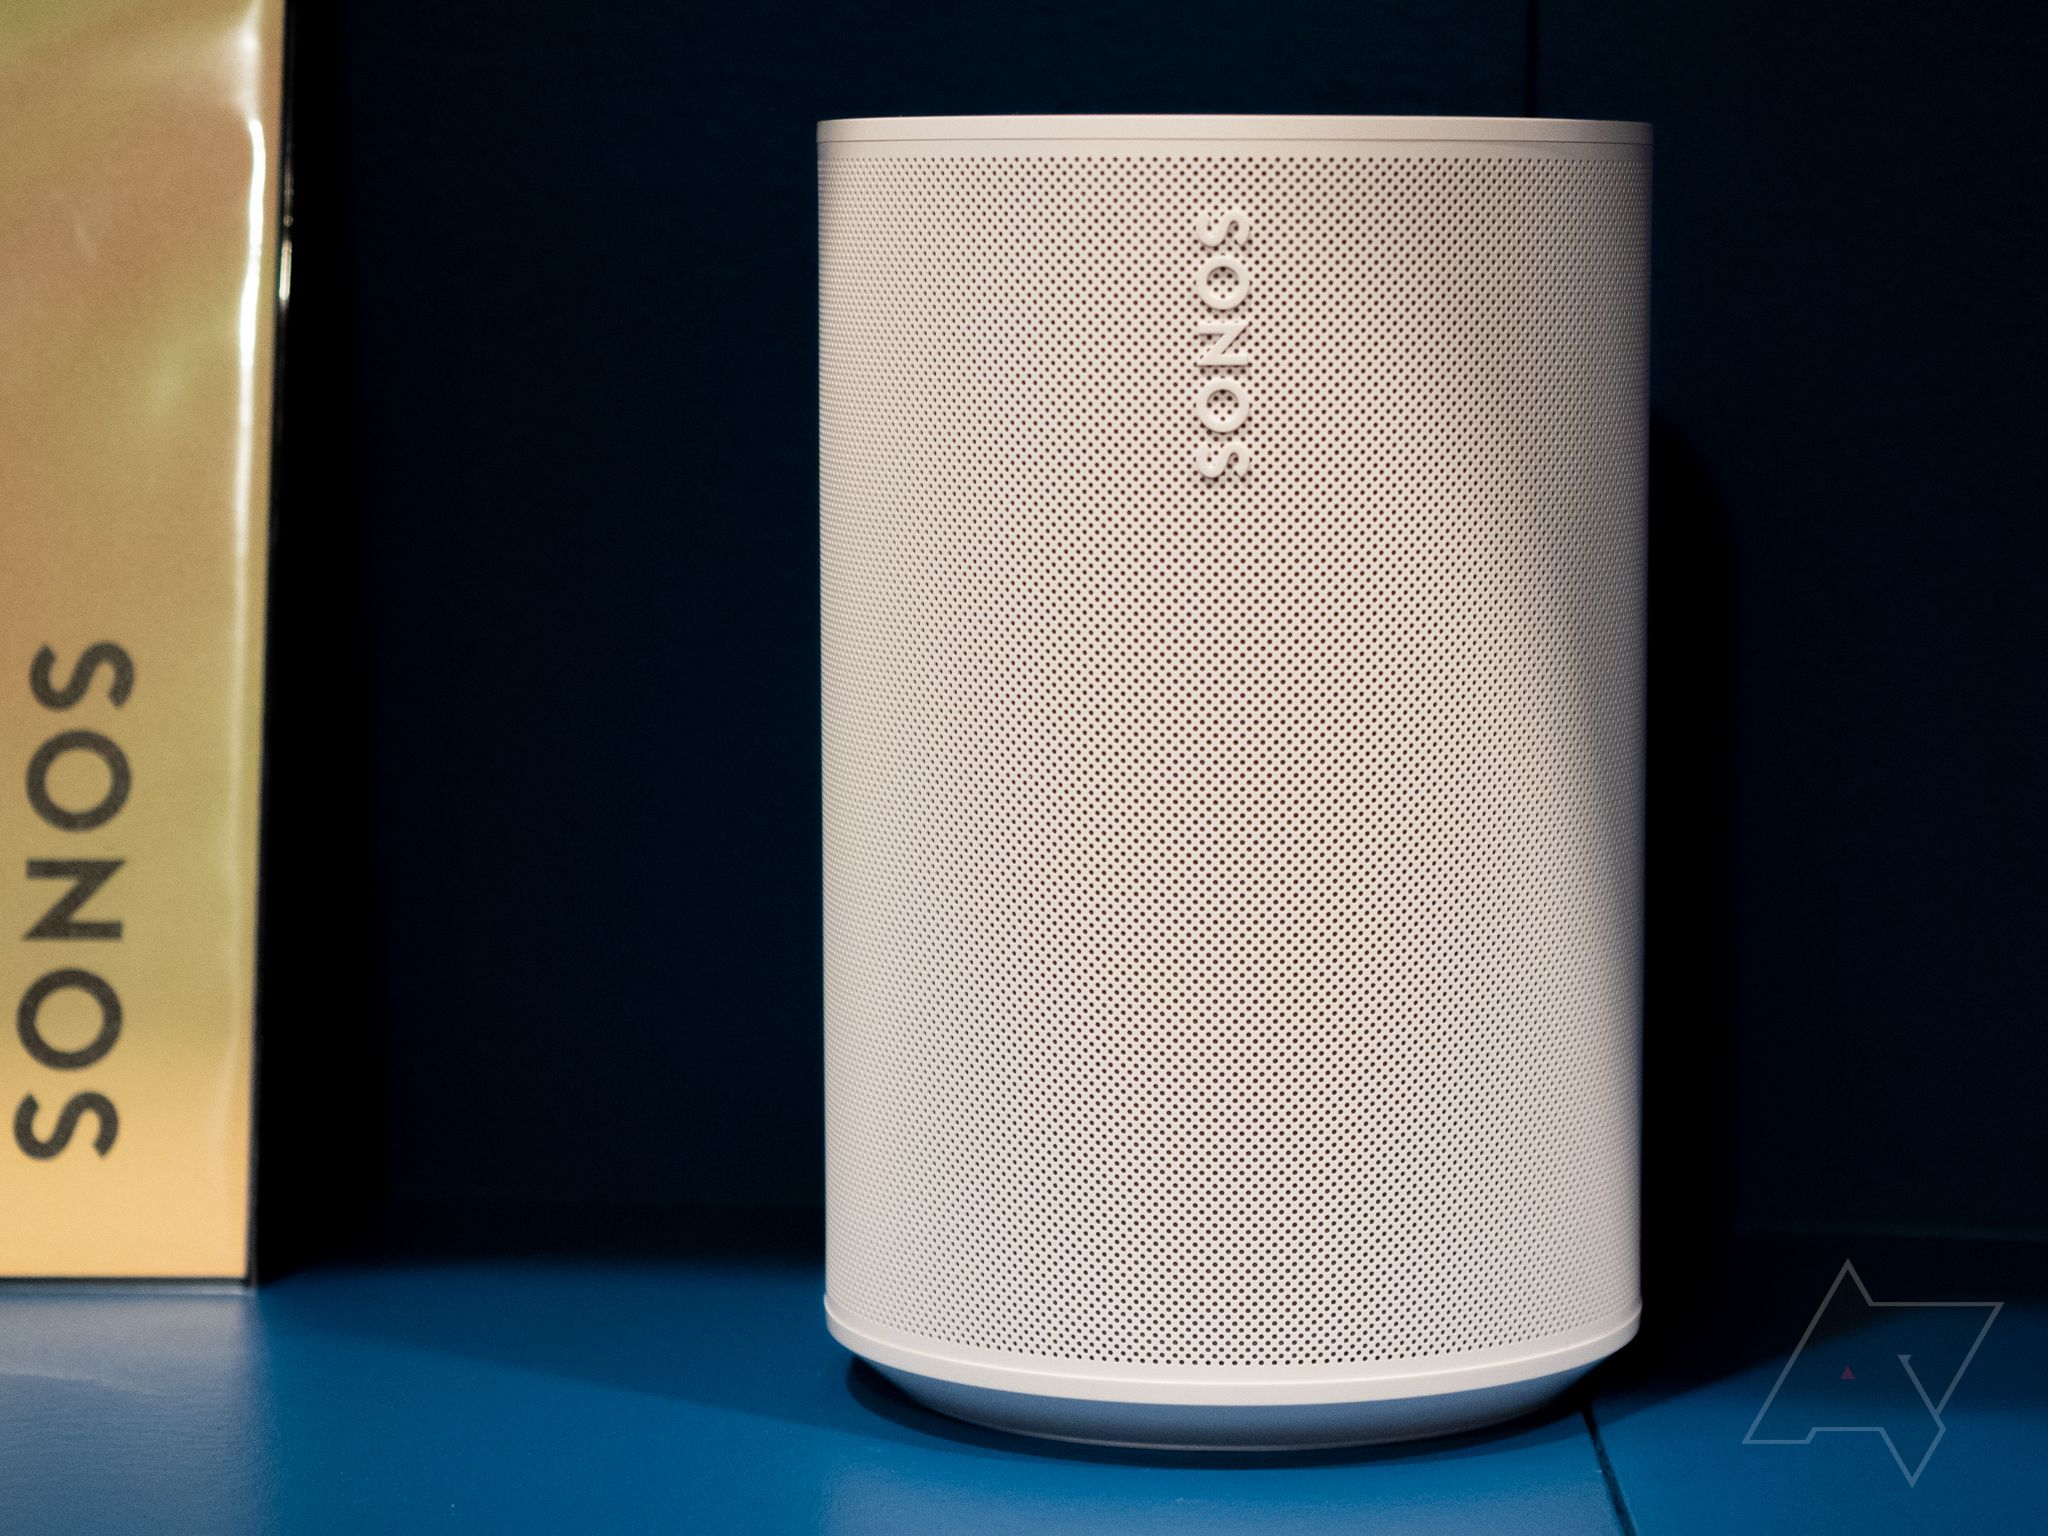 Sonos Era 300 review: Competent sound from odd-shaped speaker promising  spatial audio - Techgoondu